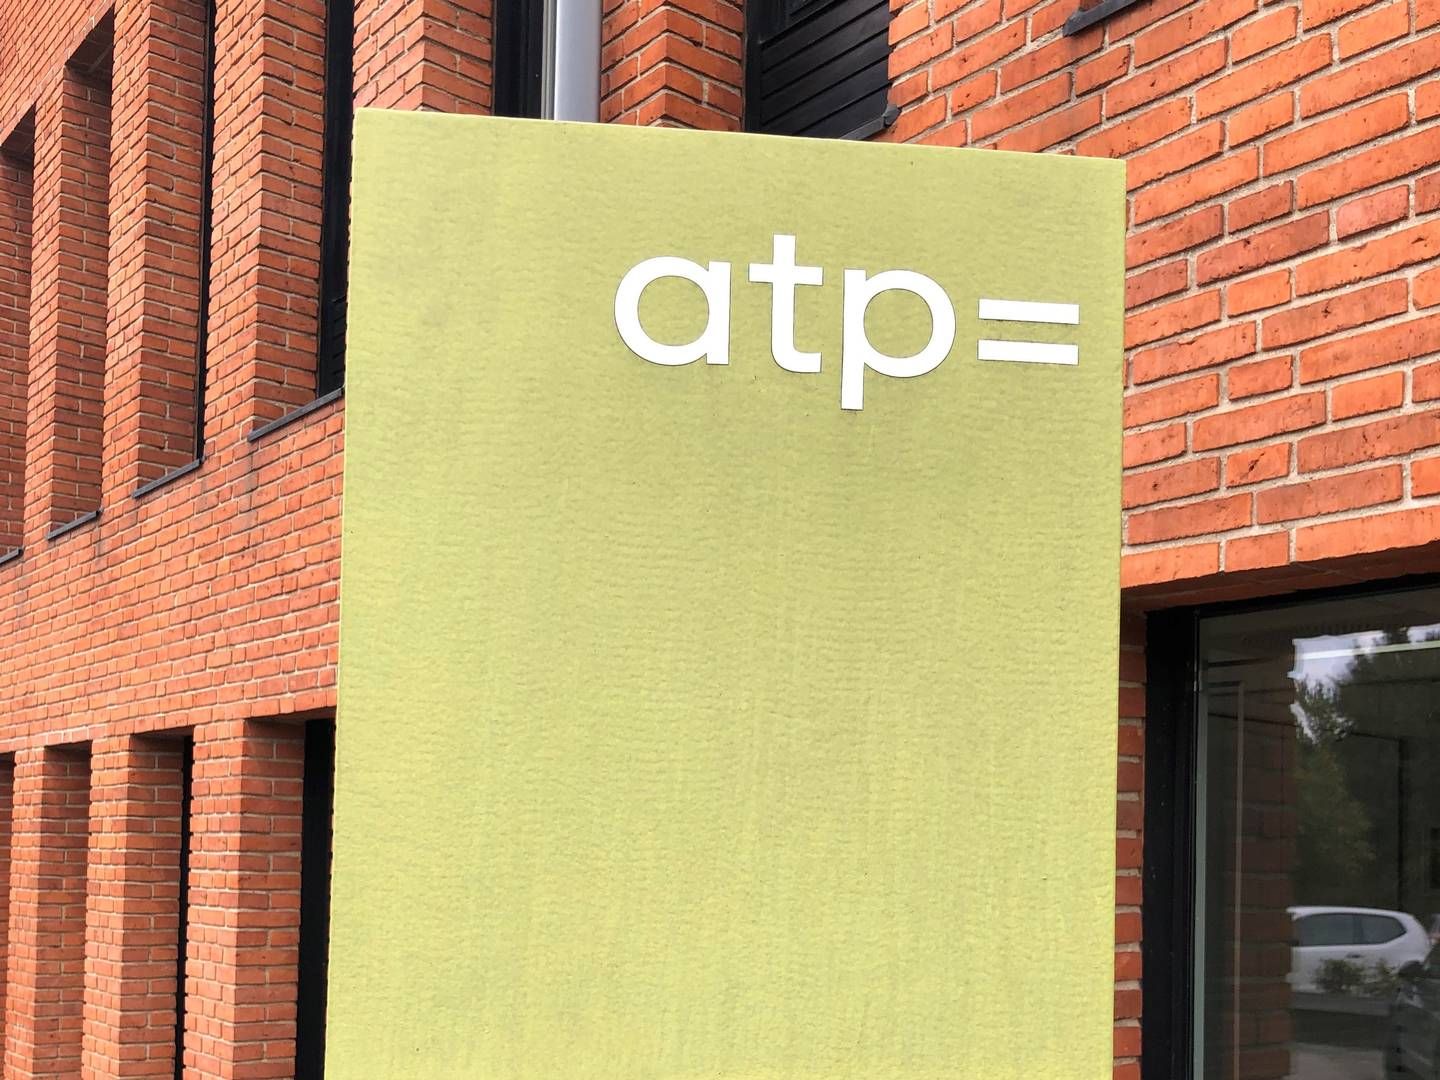 By the end of Q3 last year, ATP's AUM totaled DKK 677bn (EUR 91bn) | Photo: Dorthe Bach